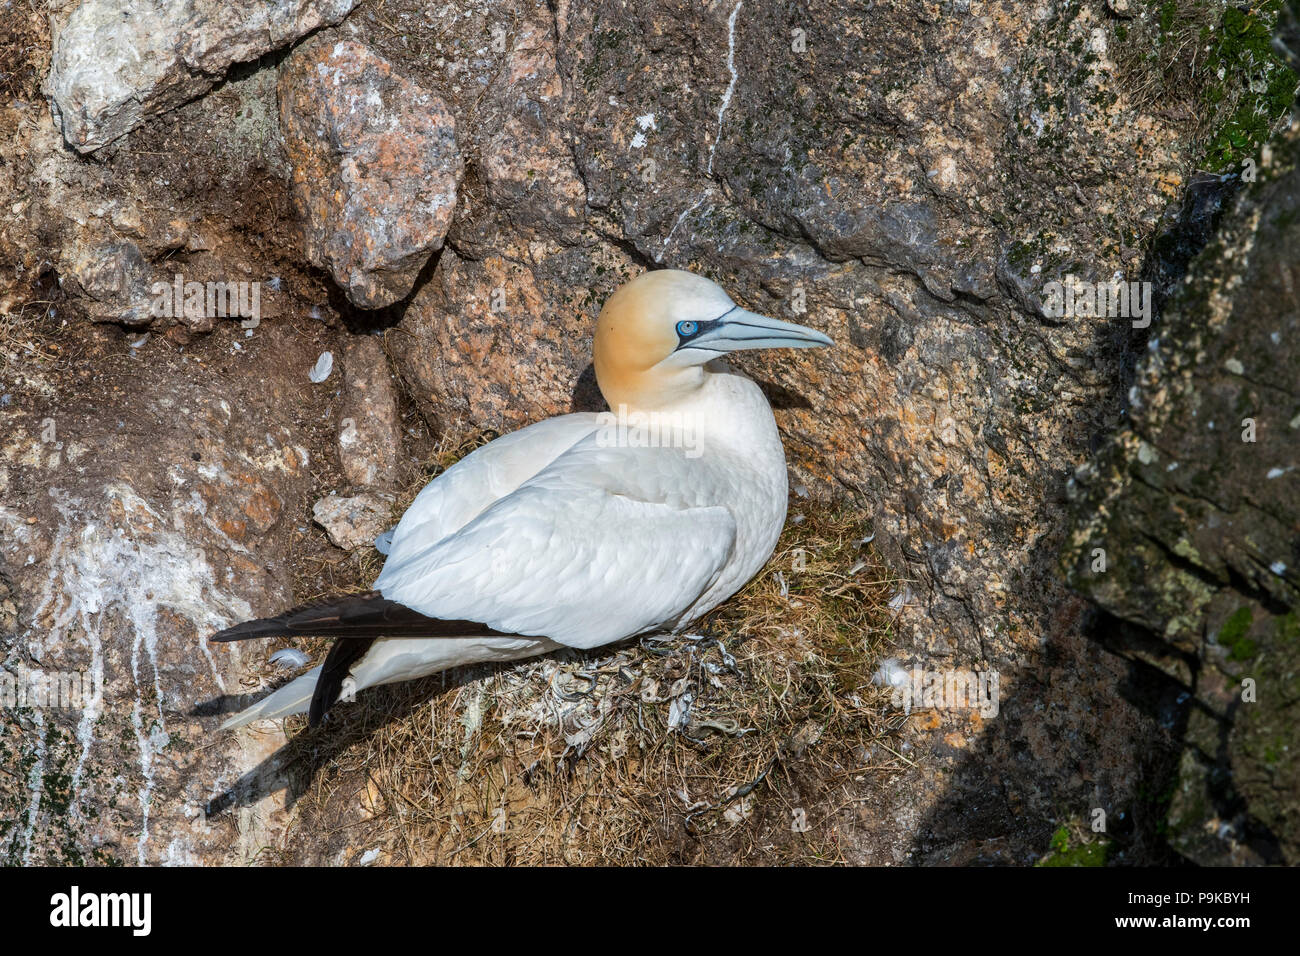 Northern gannet (Morus bassanus) at gannetry breeding on nest on rock ledge in sea cliff at seabird colony in spring, Scotland, UK Stock Photo